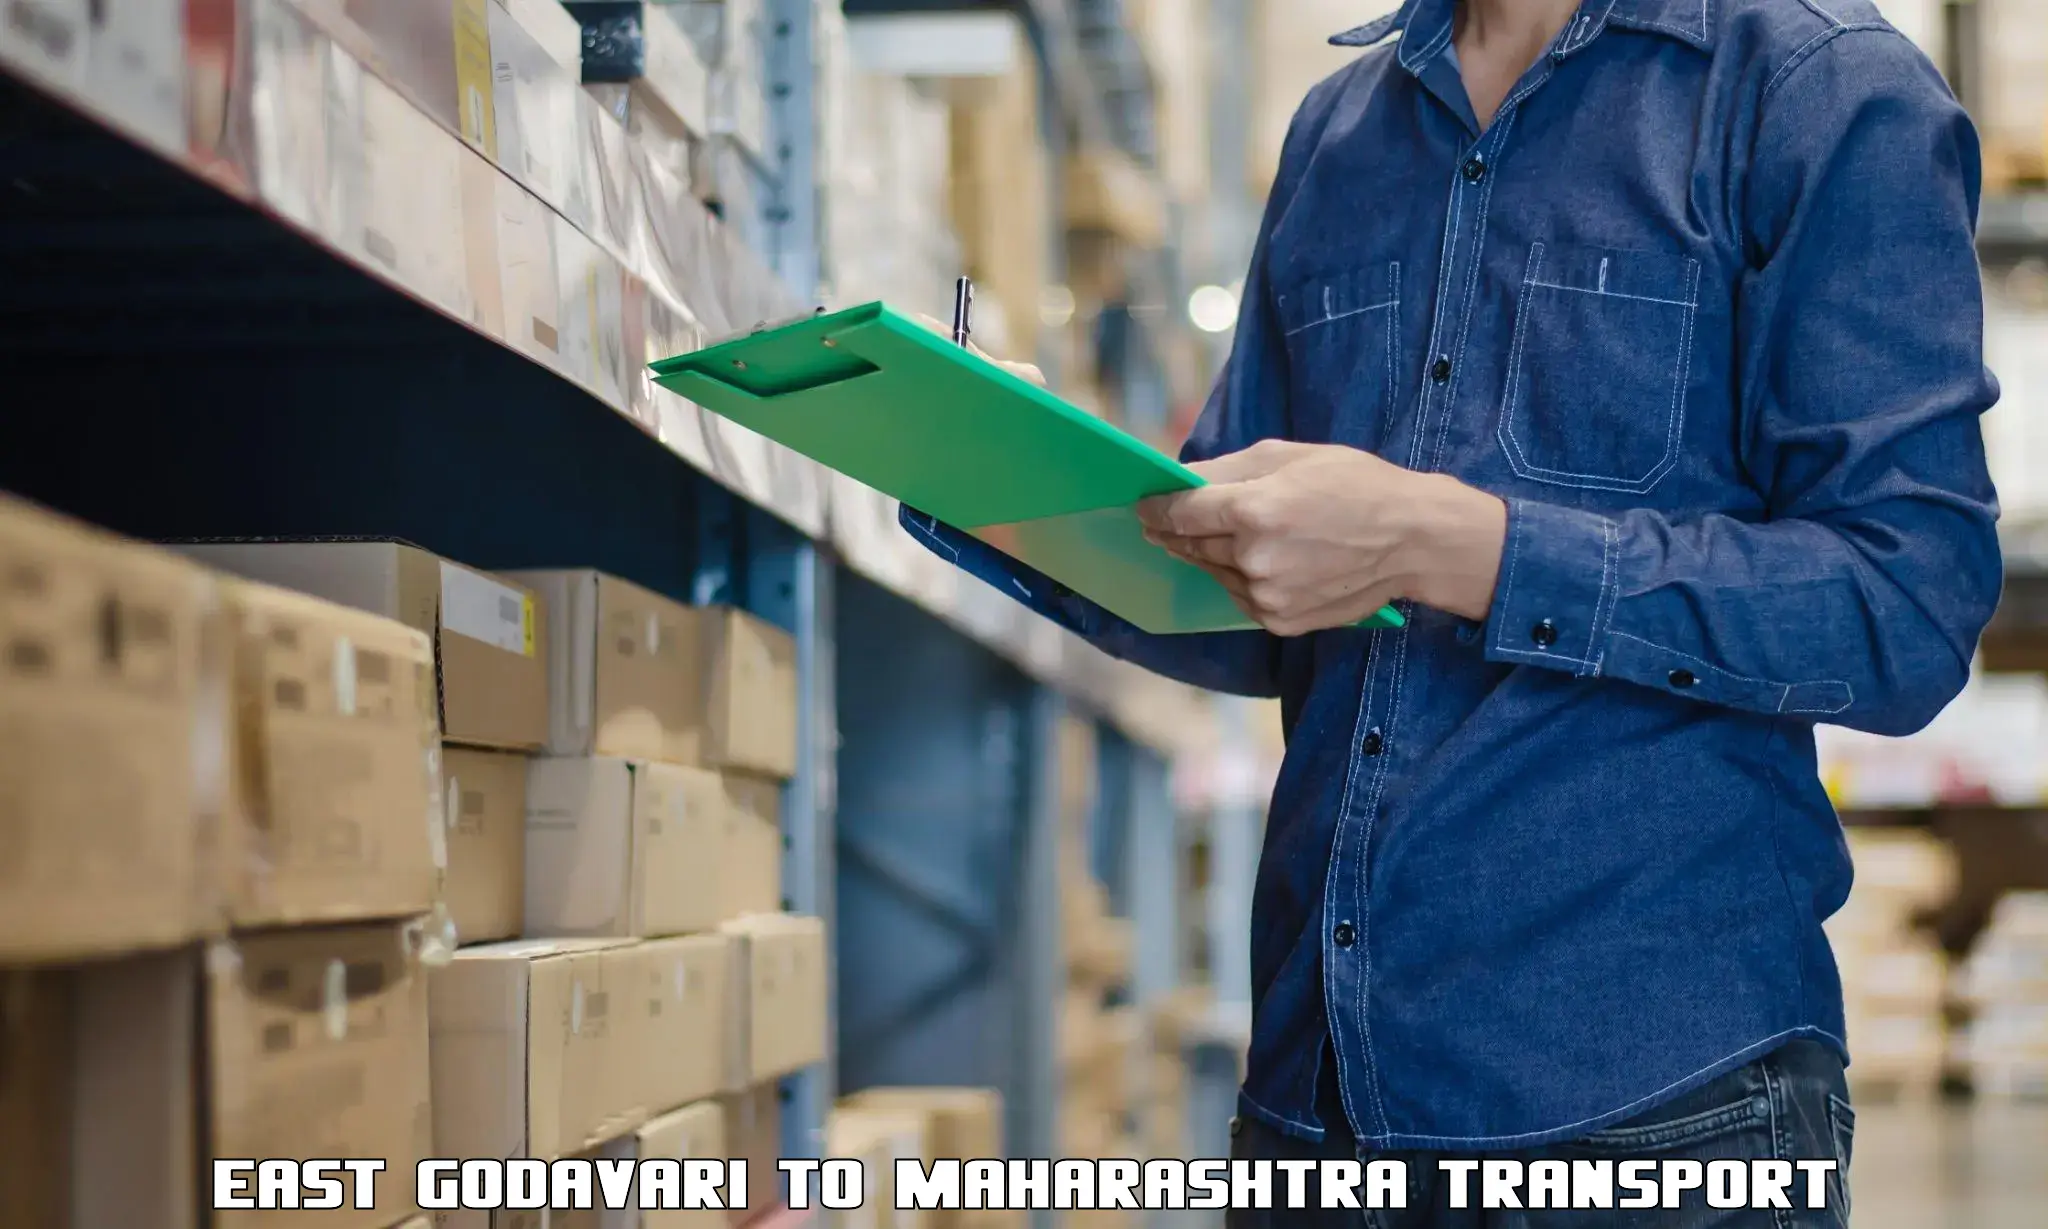 Container transportation services East Godavari to Nanded